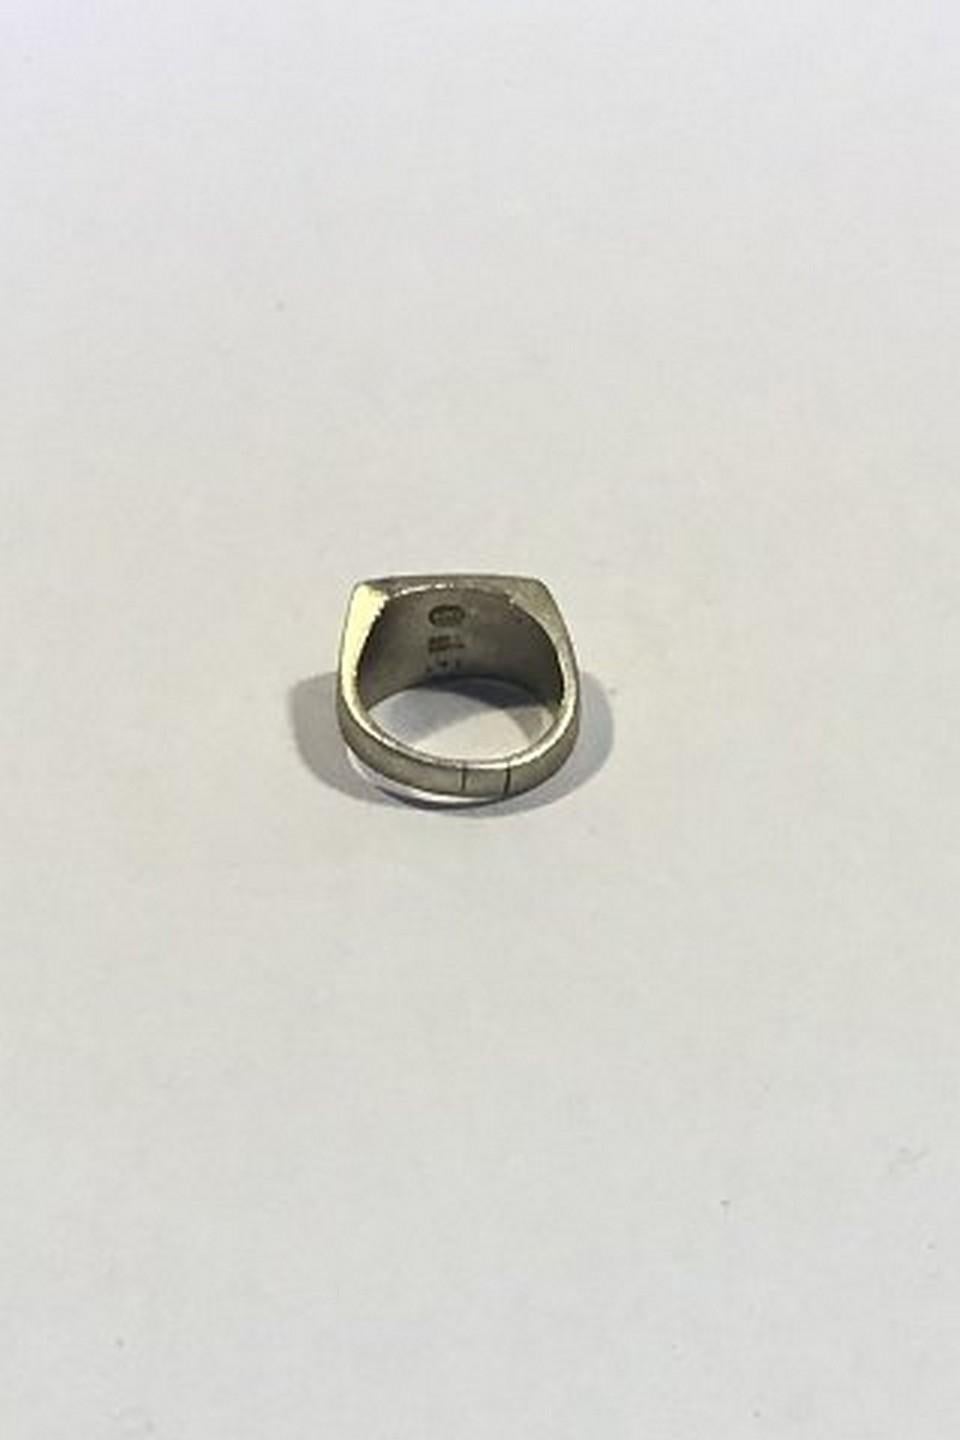 Georg Jensen Sterling Silver Ring No 141 Satin Finish Ring Size 55 US 7 1/4 Weight 11.6 gr/0.41 oz